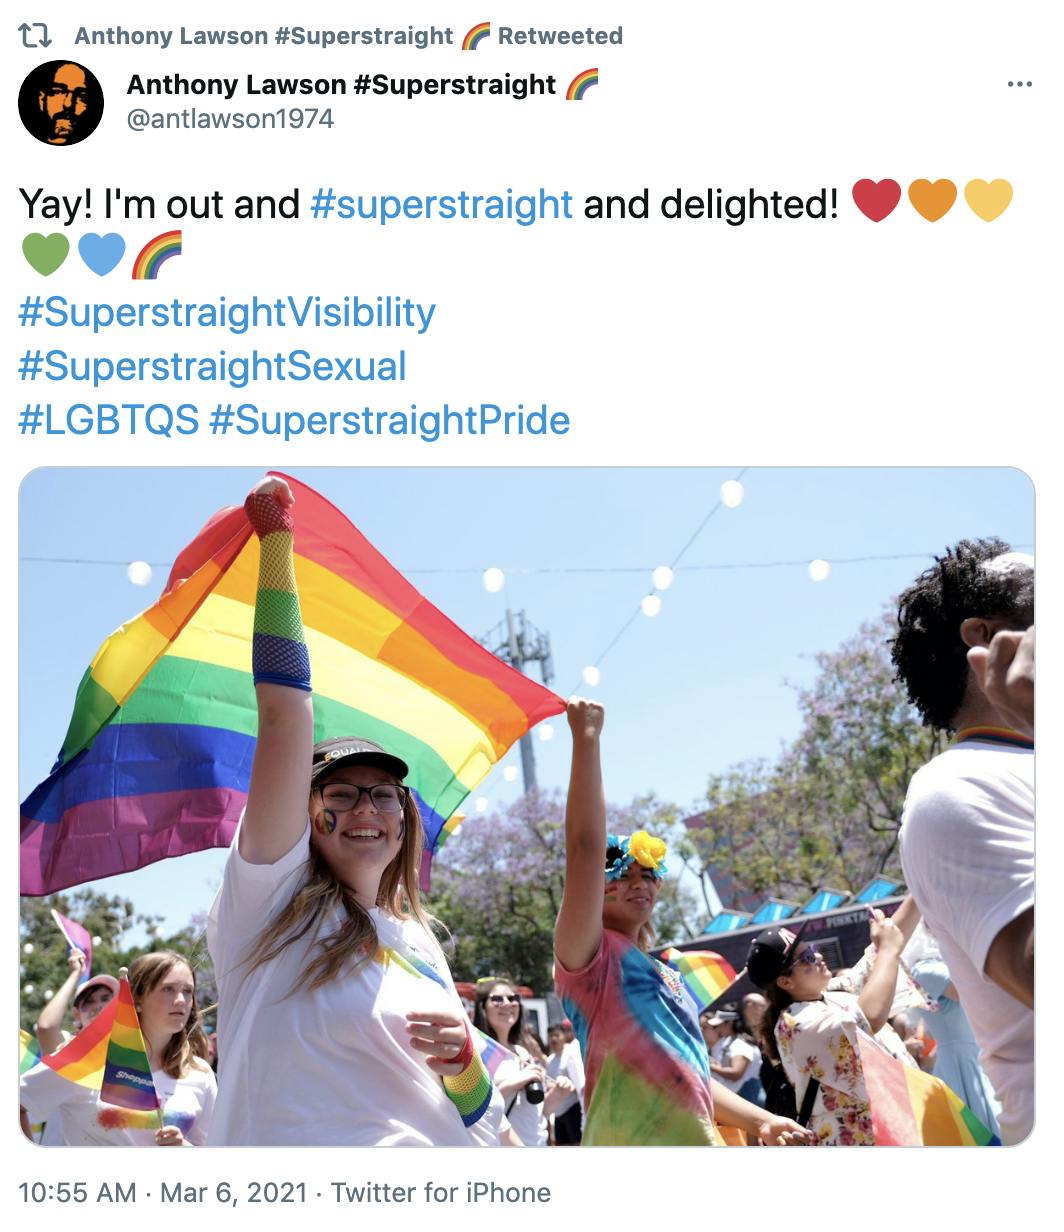 'Yay! I'm out and #superstraight and delighted! Red heartOrange heartYellow heartGreen heartBlue heartRainbow #SuperstraightVisibility #SuperstraightSexual #LGBTQS #SuperstraightPride' picture of smiling people waving pride flags